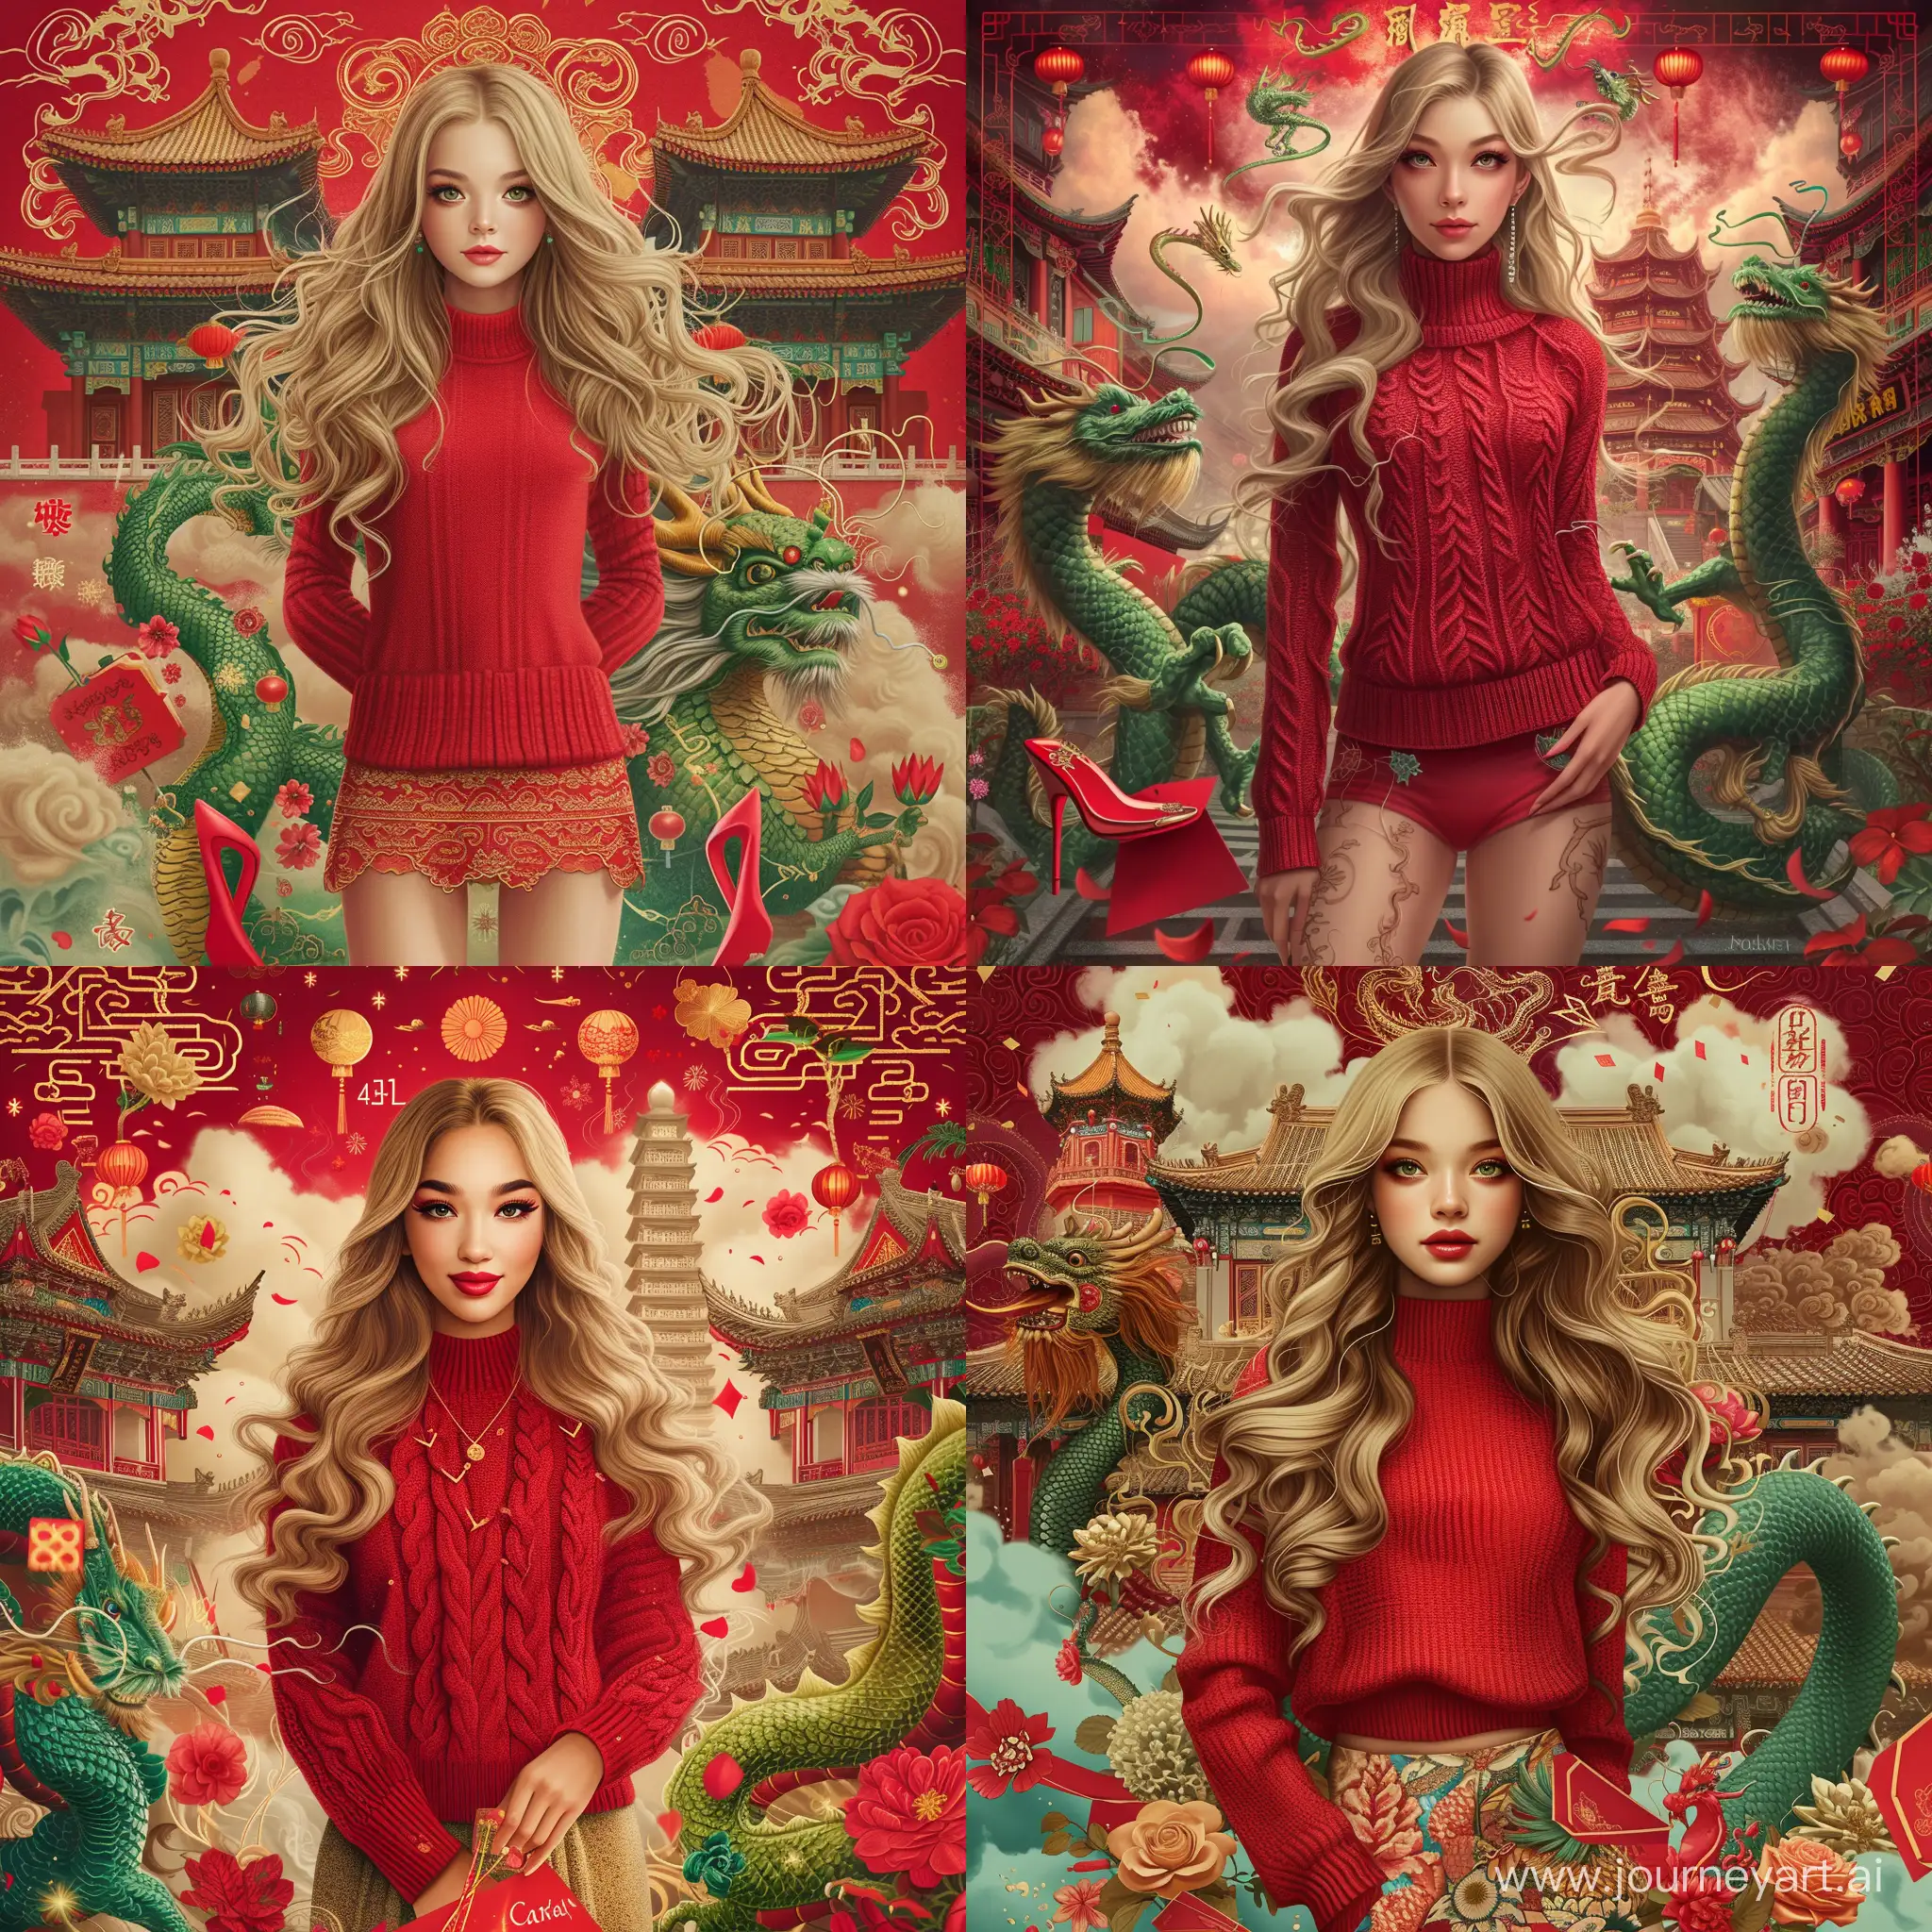 (masterpiece:1.2),(best quality:1.2),realistic,4K,exquisite details,perfect composition,（Chinese building background:1.4），illustrator,Canadian,（A stunning girl:1.2)，（beautiful：1.1）,(long curved hair:1.2),Long blonde gradient hair，(delicate face:1.3),full body,26 years old，（big eyes：1.1）,eyelashes,fashion,short dress,(1eastern dragon:1.3), （1green dragon：1.4）, The dragon surrounds the girl,solo,smile,Red sweater，Fashionable clothes,Red heels,(firecracker:1.1)，(fireworks:1.2), smoke, colorful auspicious clouds, Gold ingots，red envelope，flowers，dance,（Crimson background：1.2），(colorful theme:1.1),outdoors, perspective,artist name